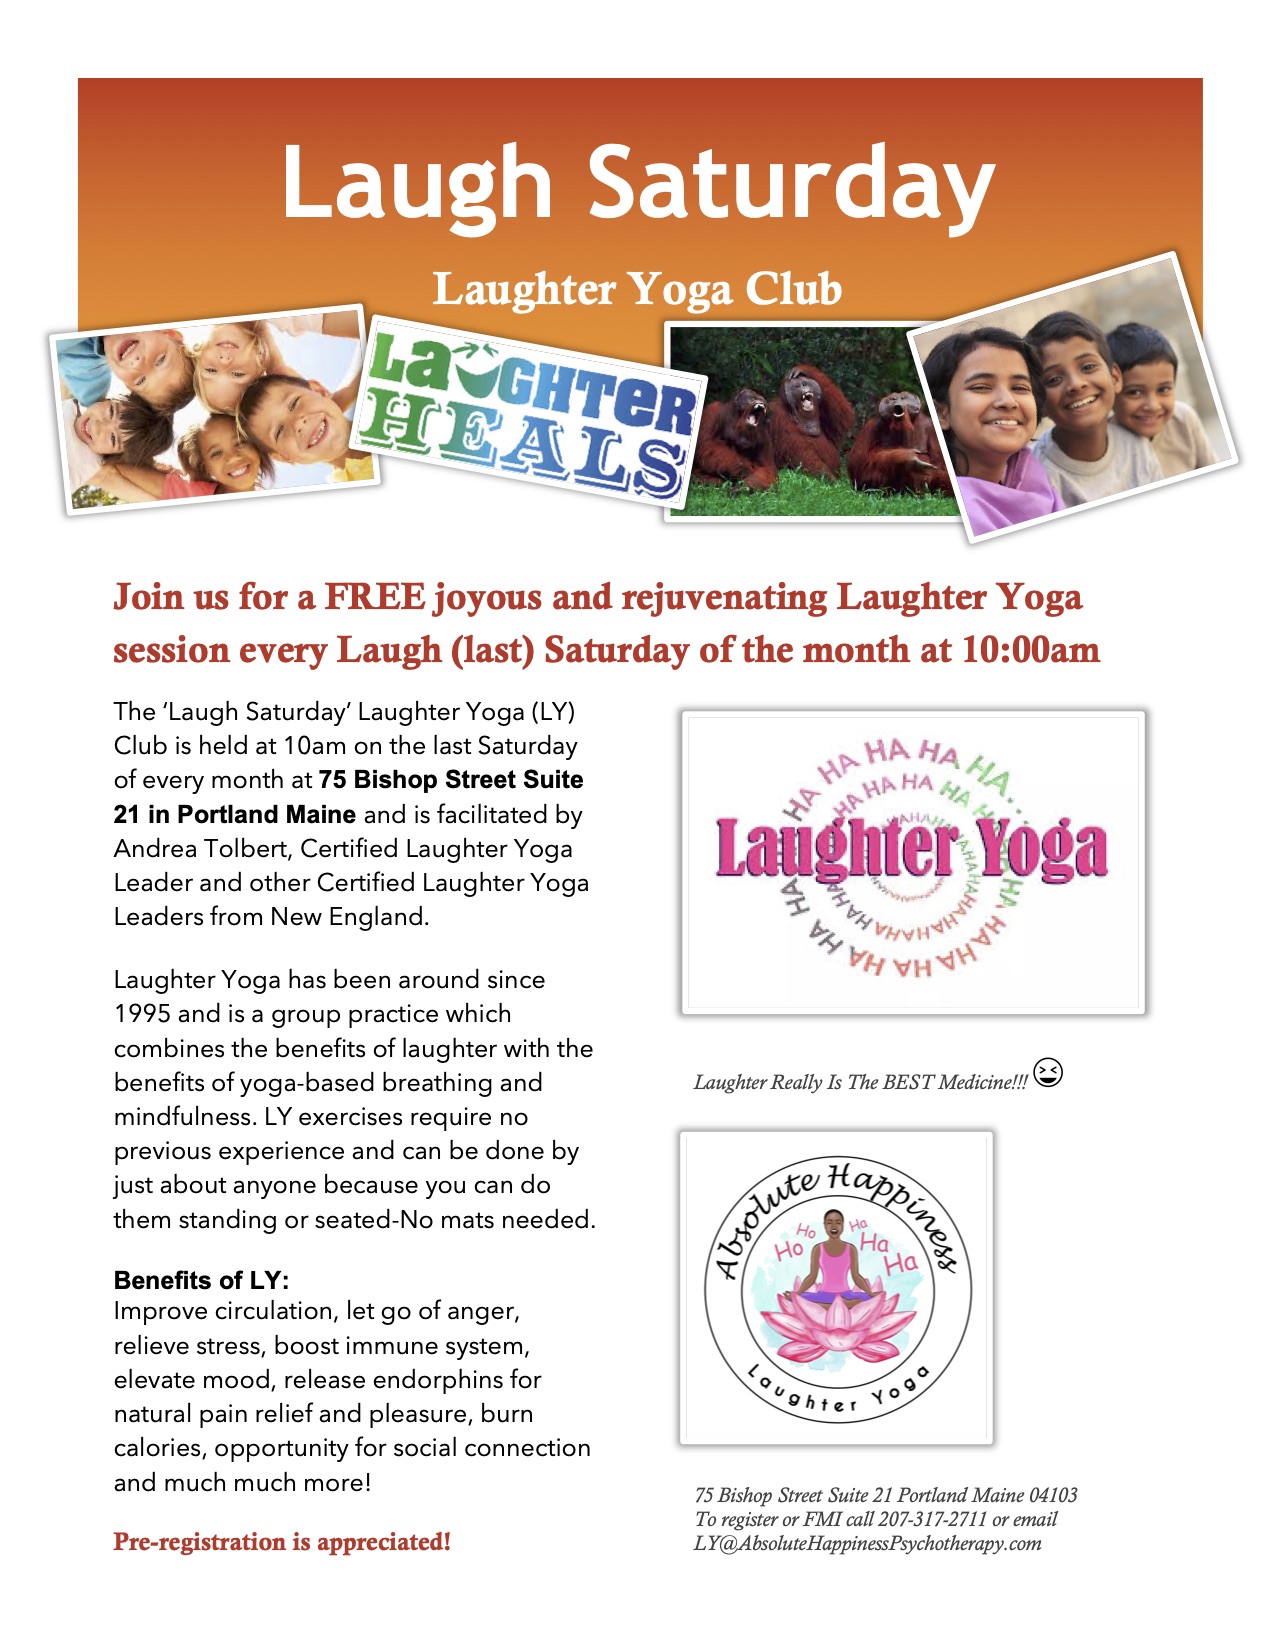 Laugh Saturday LY Flyer